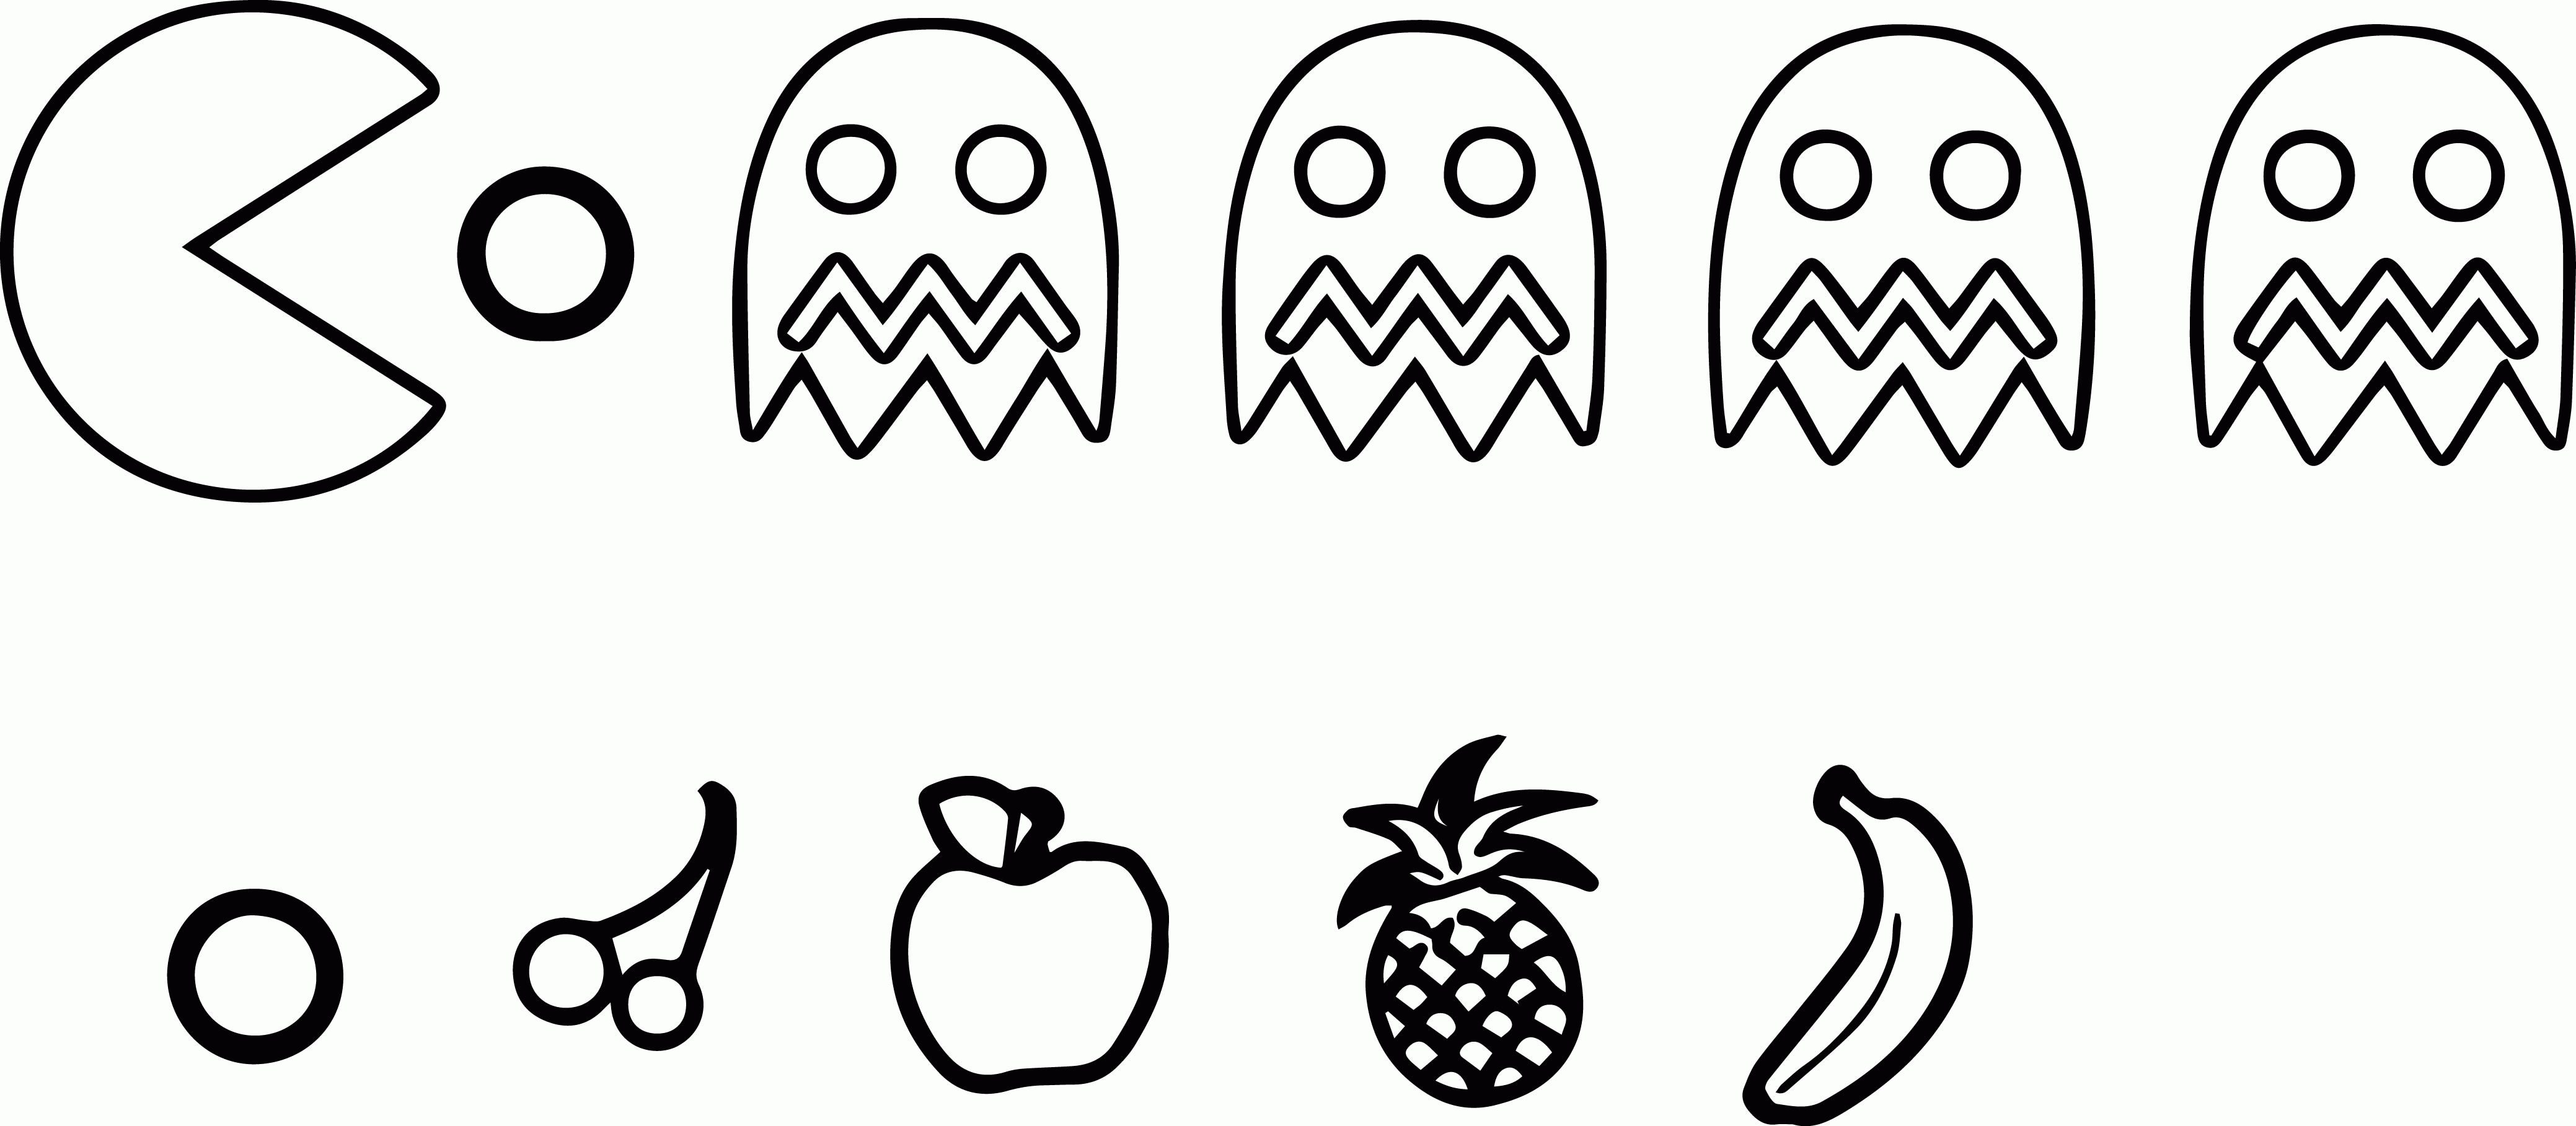 31-mrs-pac-man-coloring-pages